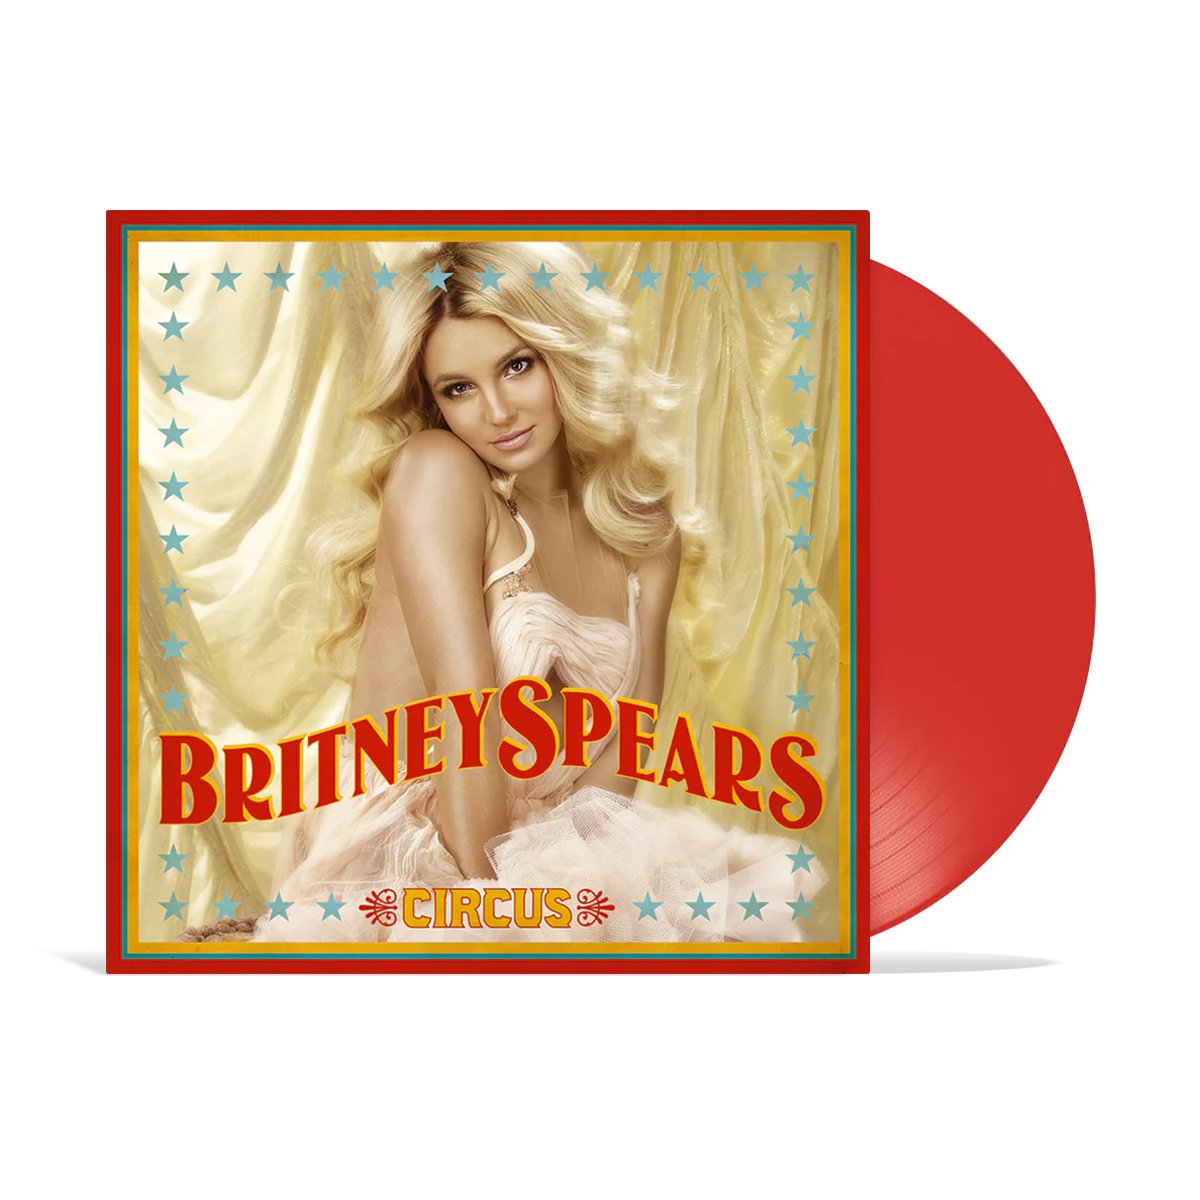 CD Shop - SPEARS, BRITNEY Circus